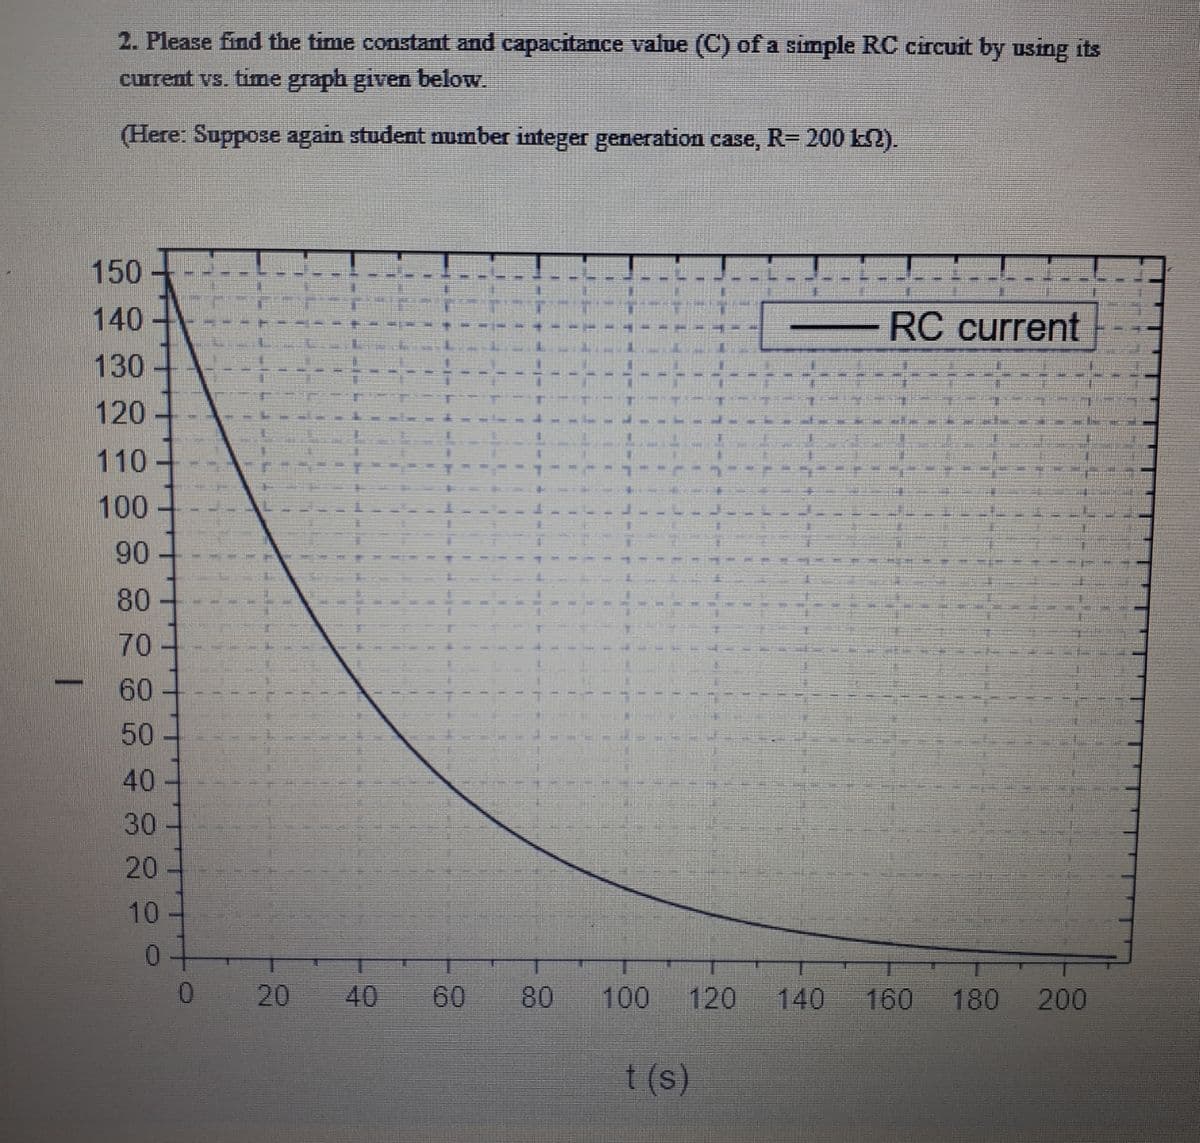 2. Please find the time constant and capacitance value (C) of a simple RC circuit by using its
current vs. timne graph given below.
(Here: Suppose again student number integer generation case, R= 200 k2).
150
140
RC current
130
120
110
100
90
80
70
60
50
40
30
20
10
40
60
80
100
120
140
160
180
200
t (s)
20
